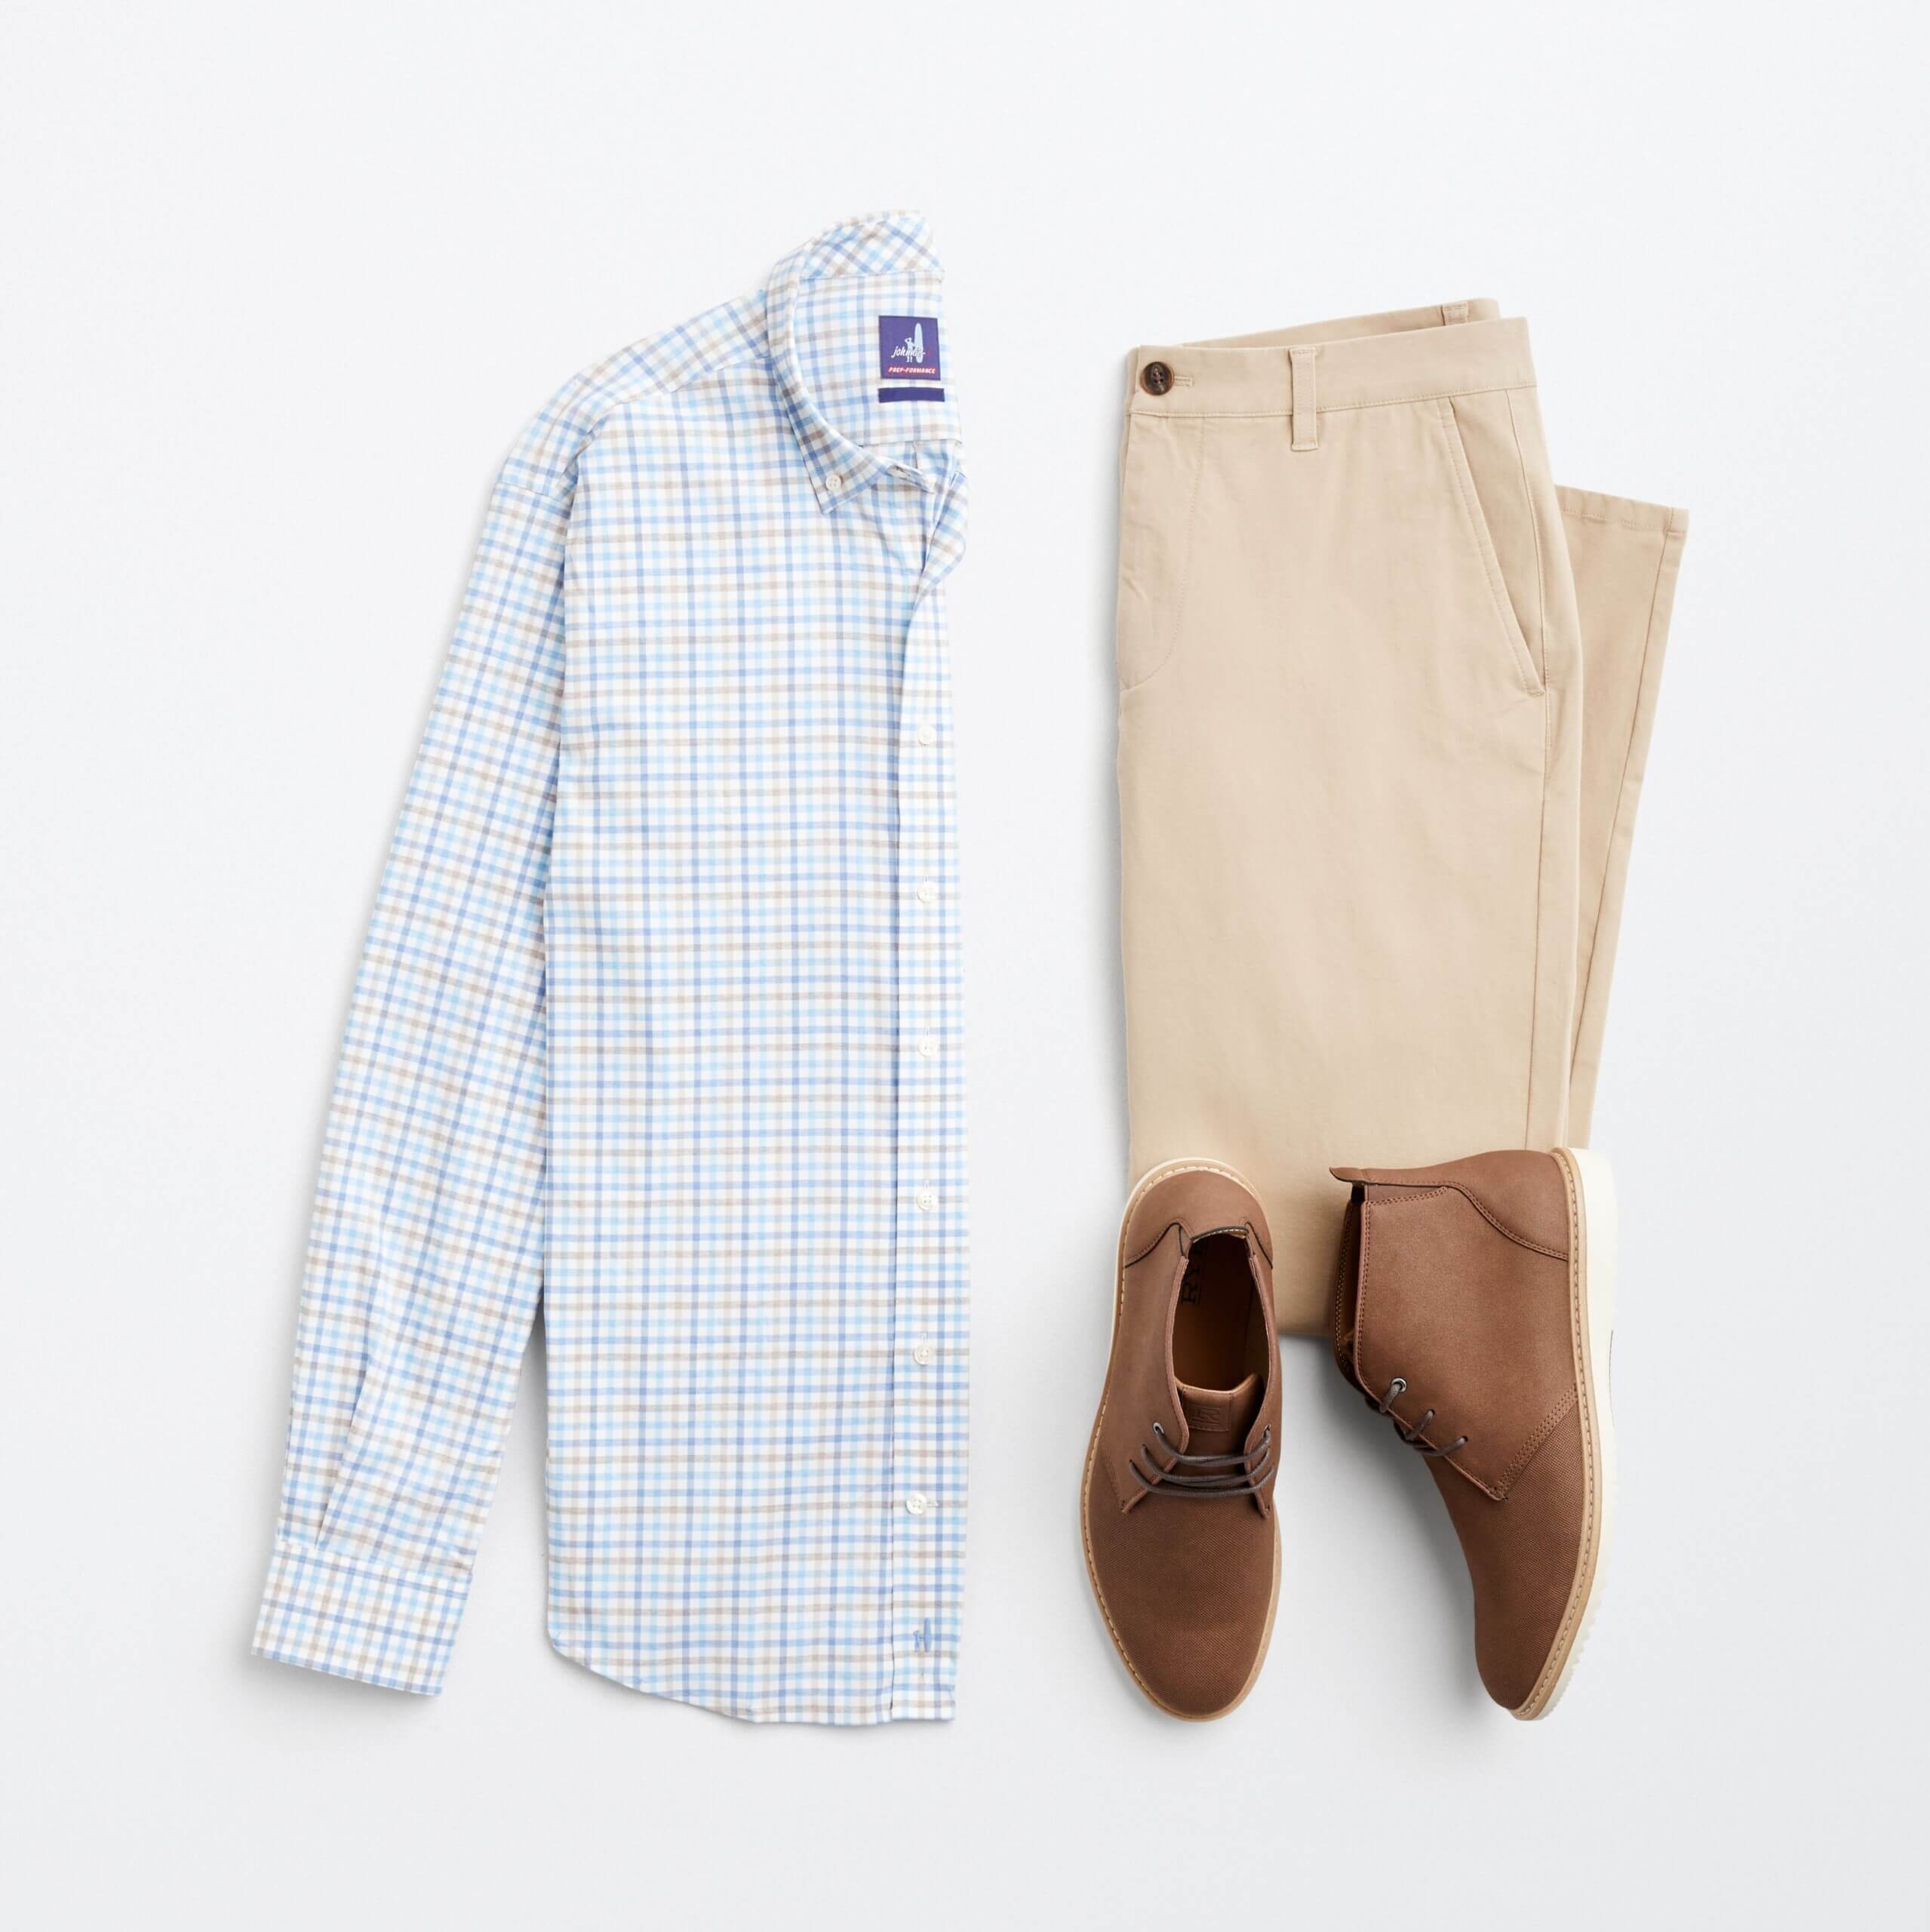 Stitch Fix men's outfit laydown featuring khaki chinos, brown chukkas and light blue button-down shirt. 